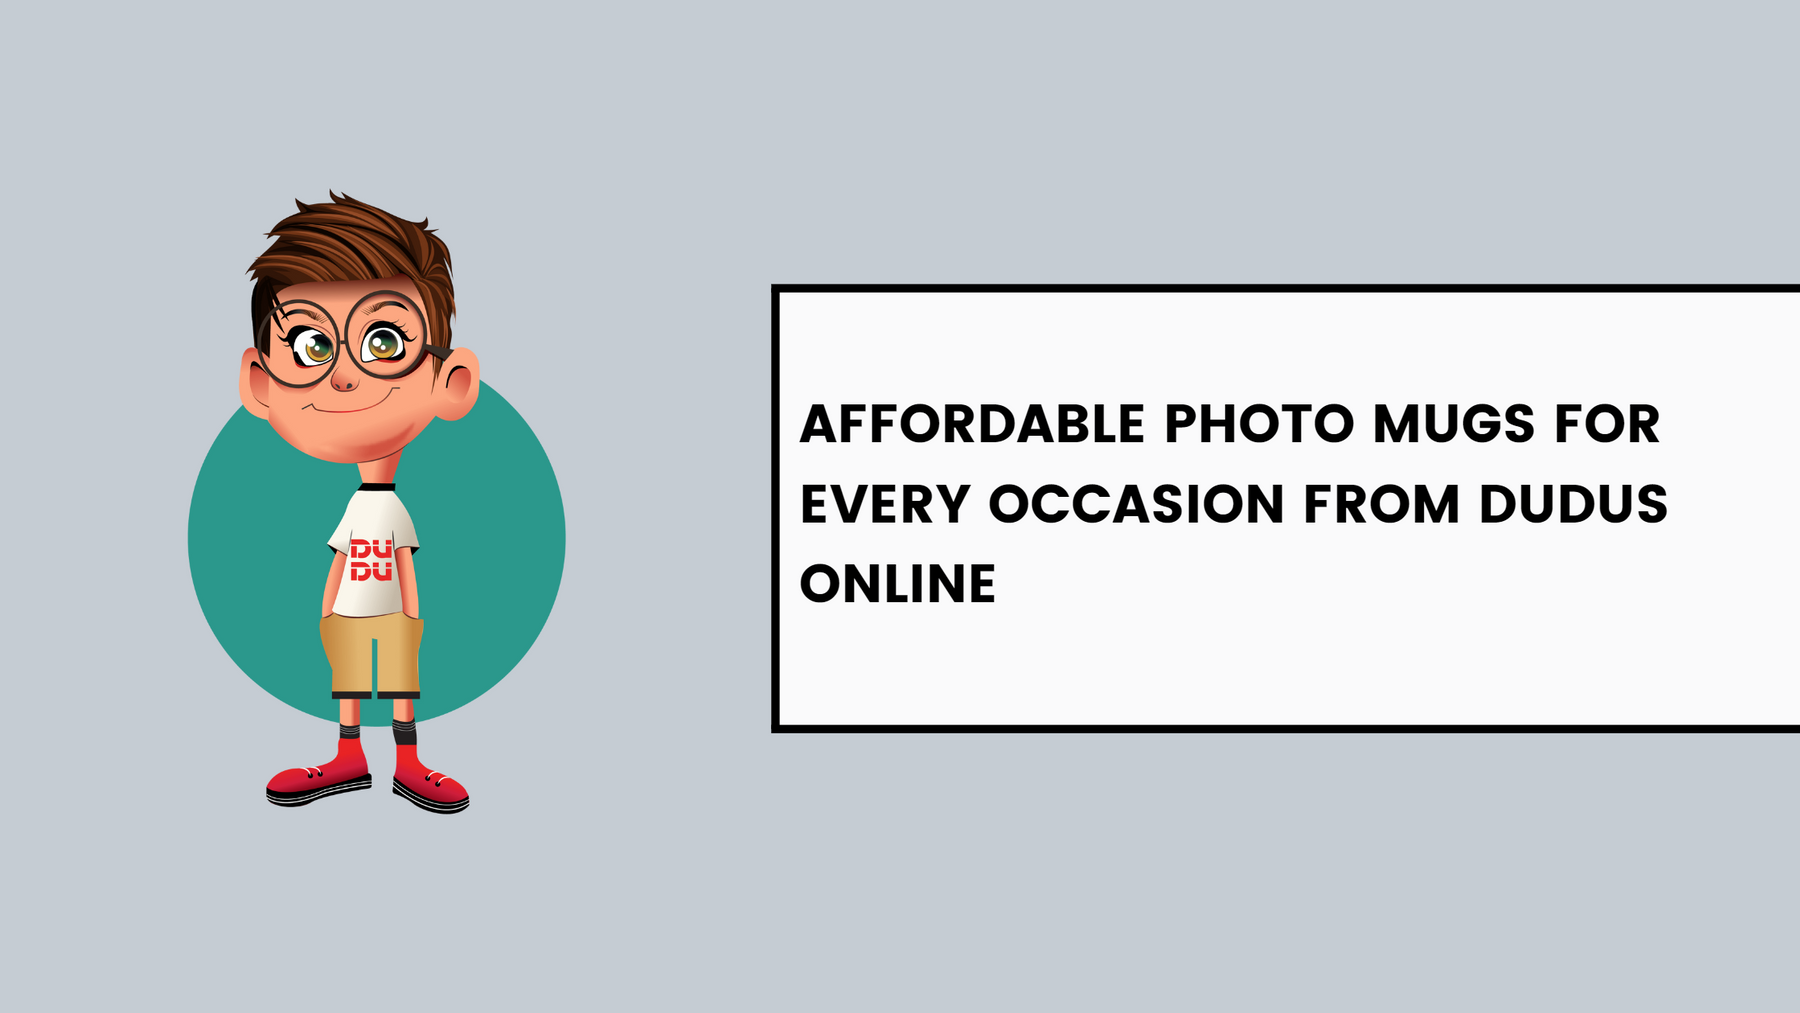 Affordable Photo Mugs for Every Occasion from Dudus Online